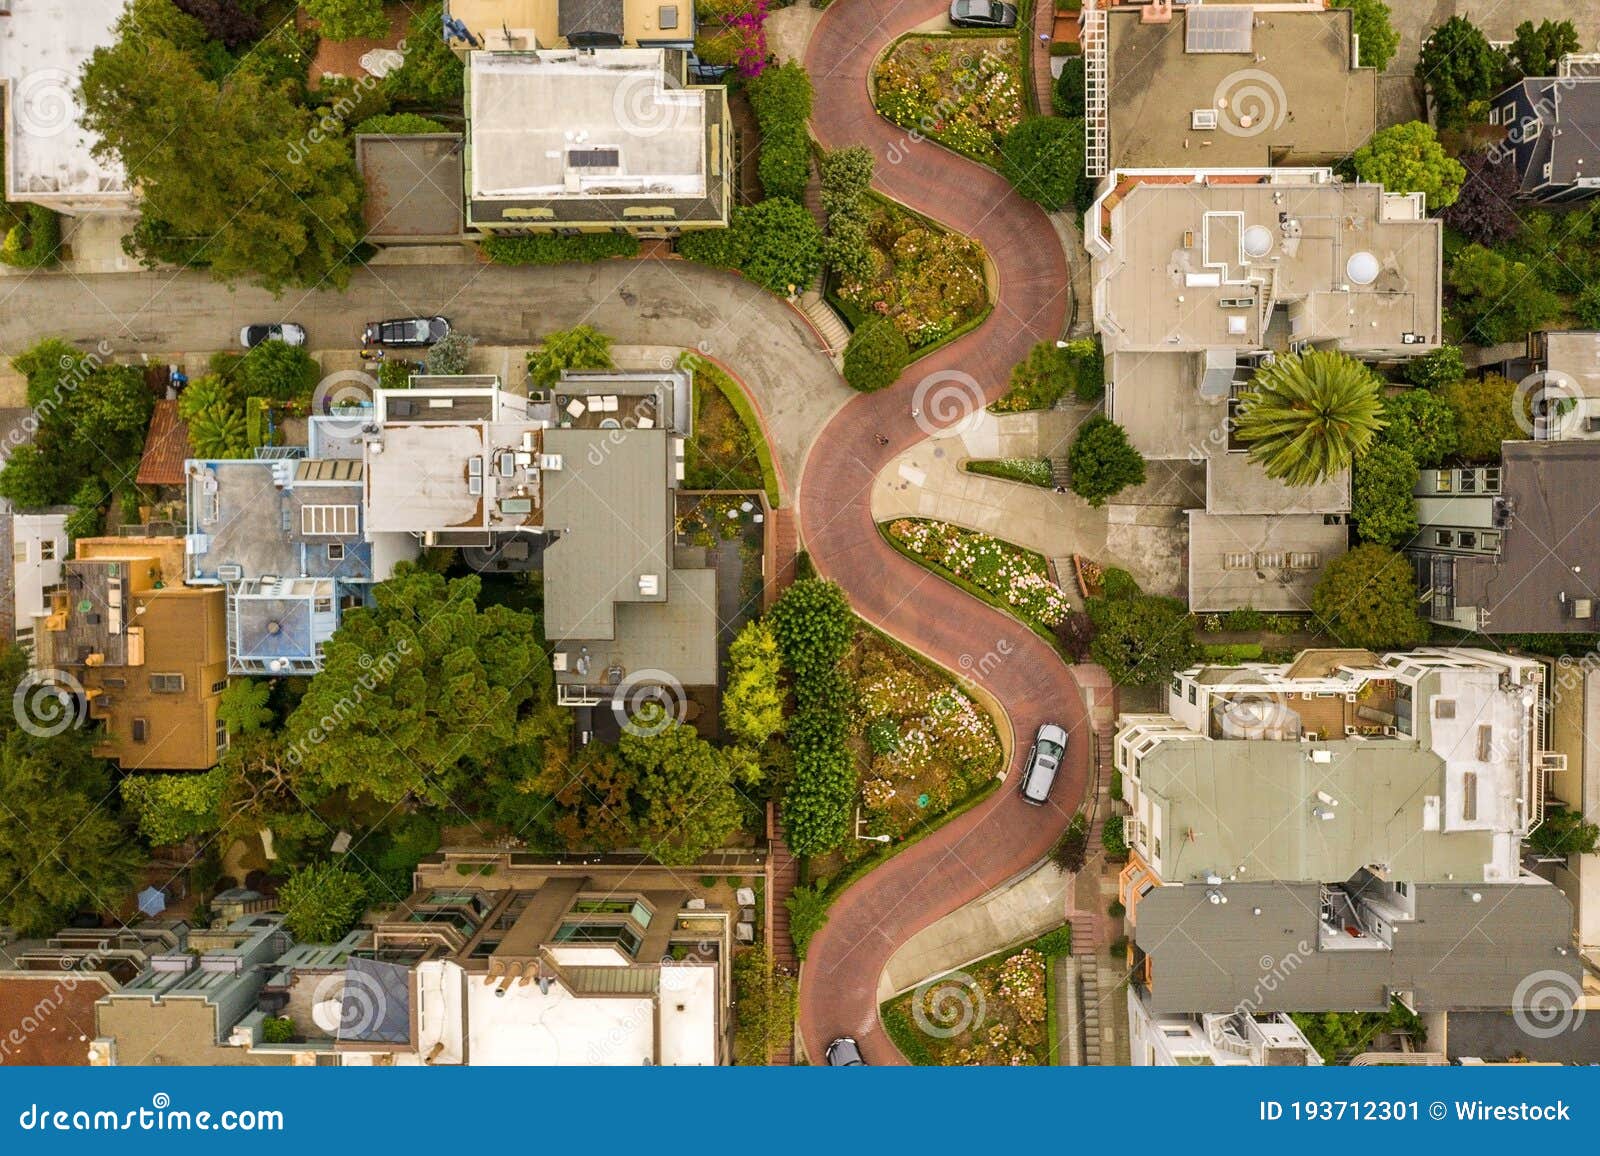 aerial view of the famous lombard street, san francisco, california